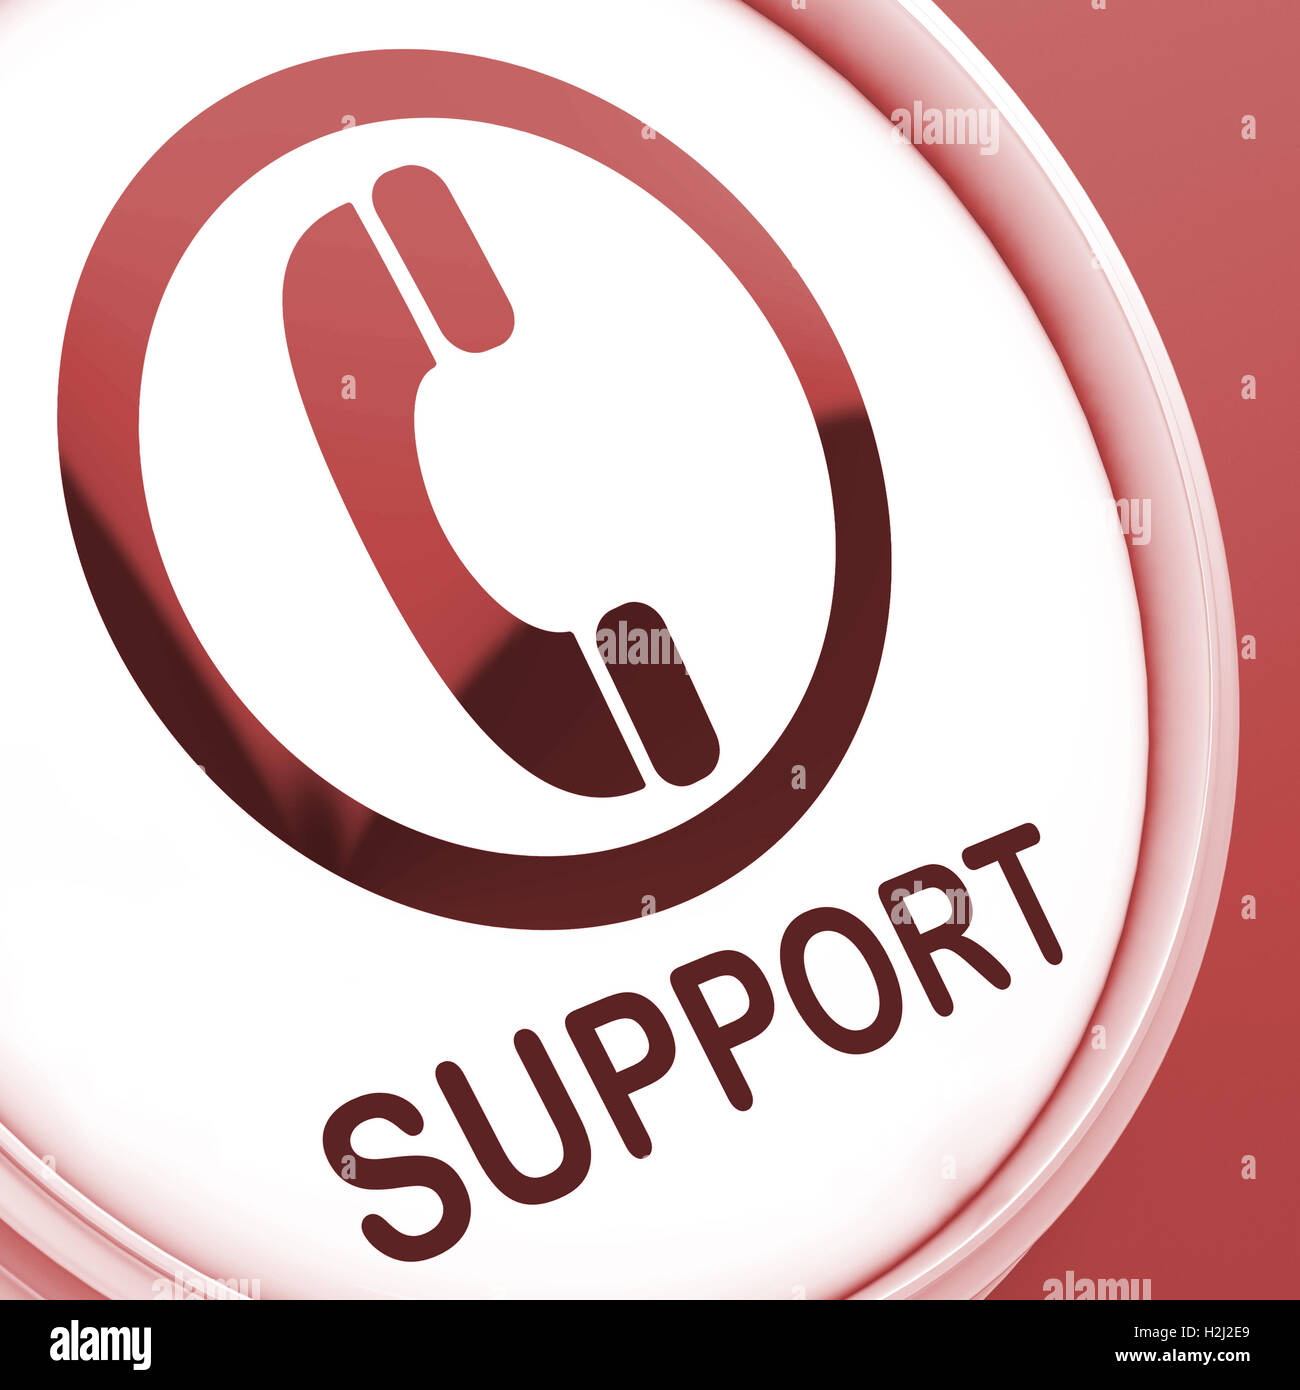 Support Button Shows Call For Advice Stock Photo